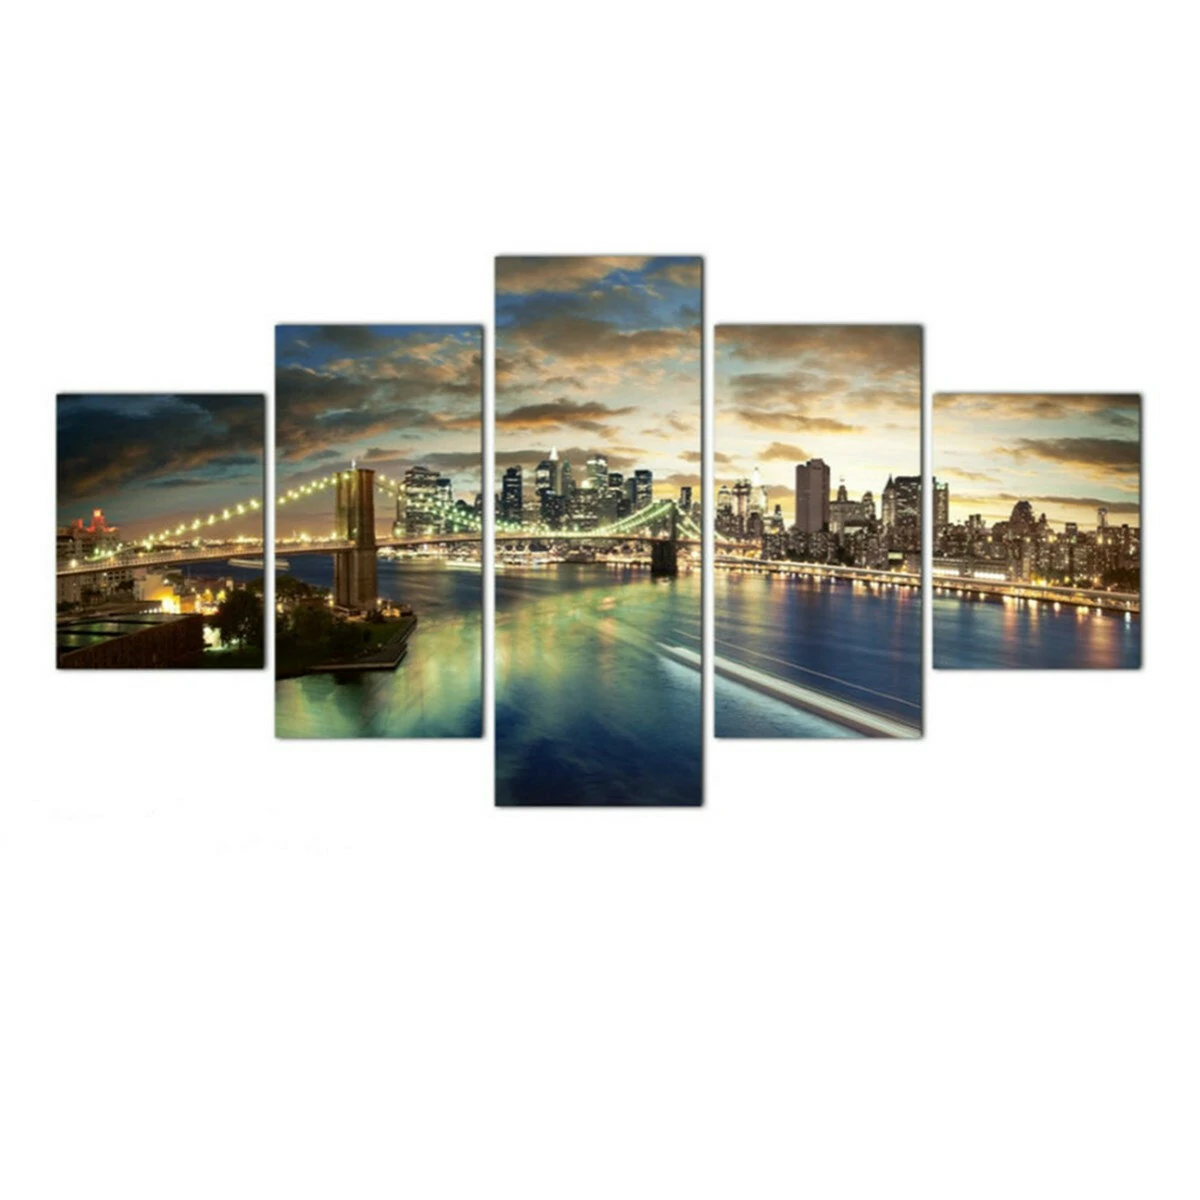 5 pcs wall decorative painting new york city at night wall decor art pictures canvas prints home office hotel decorations